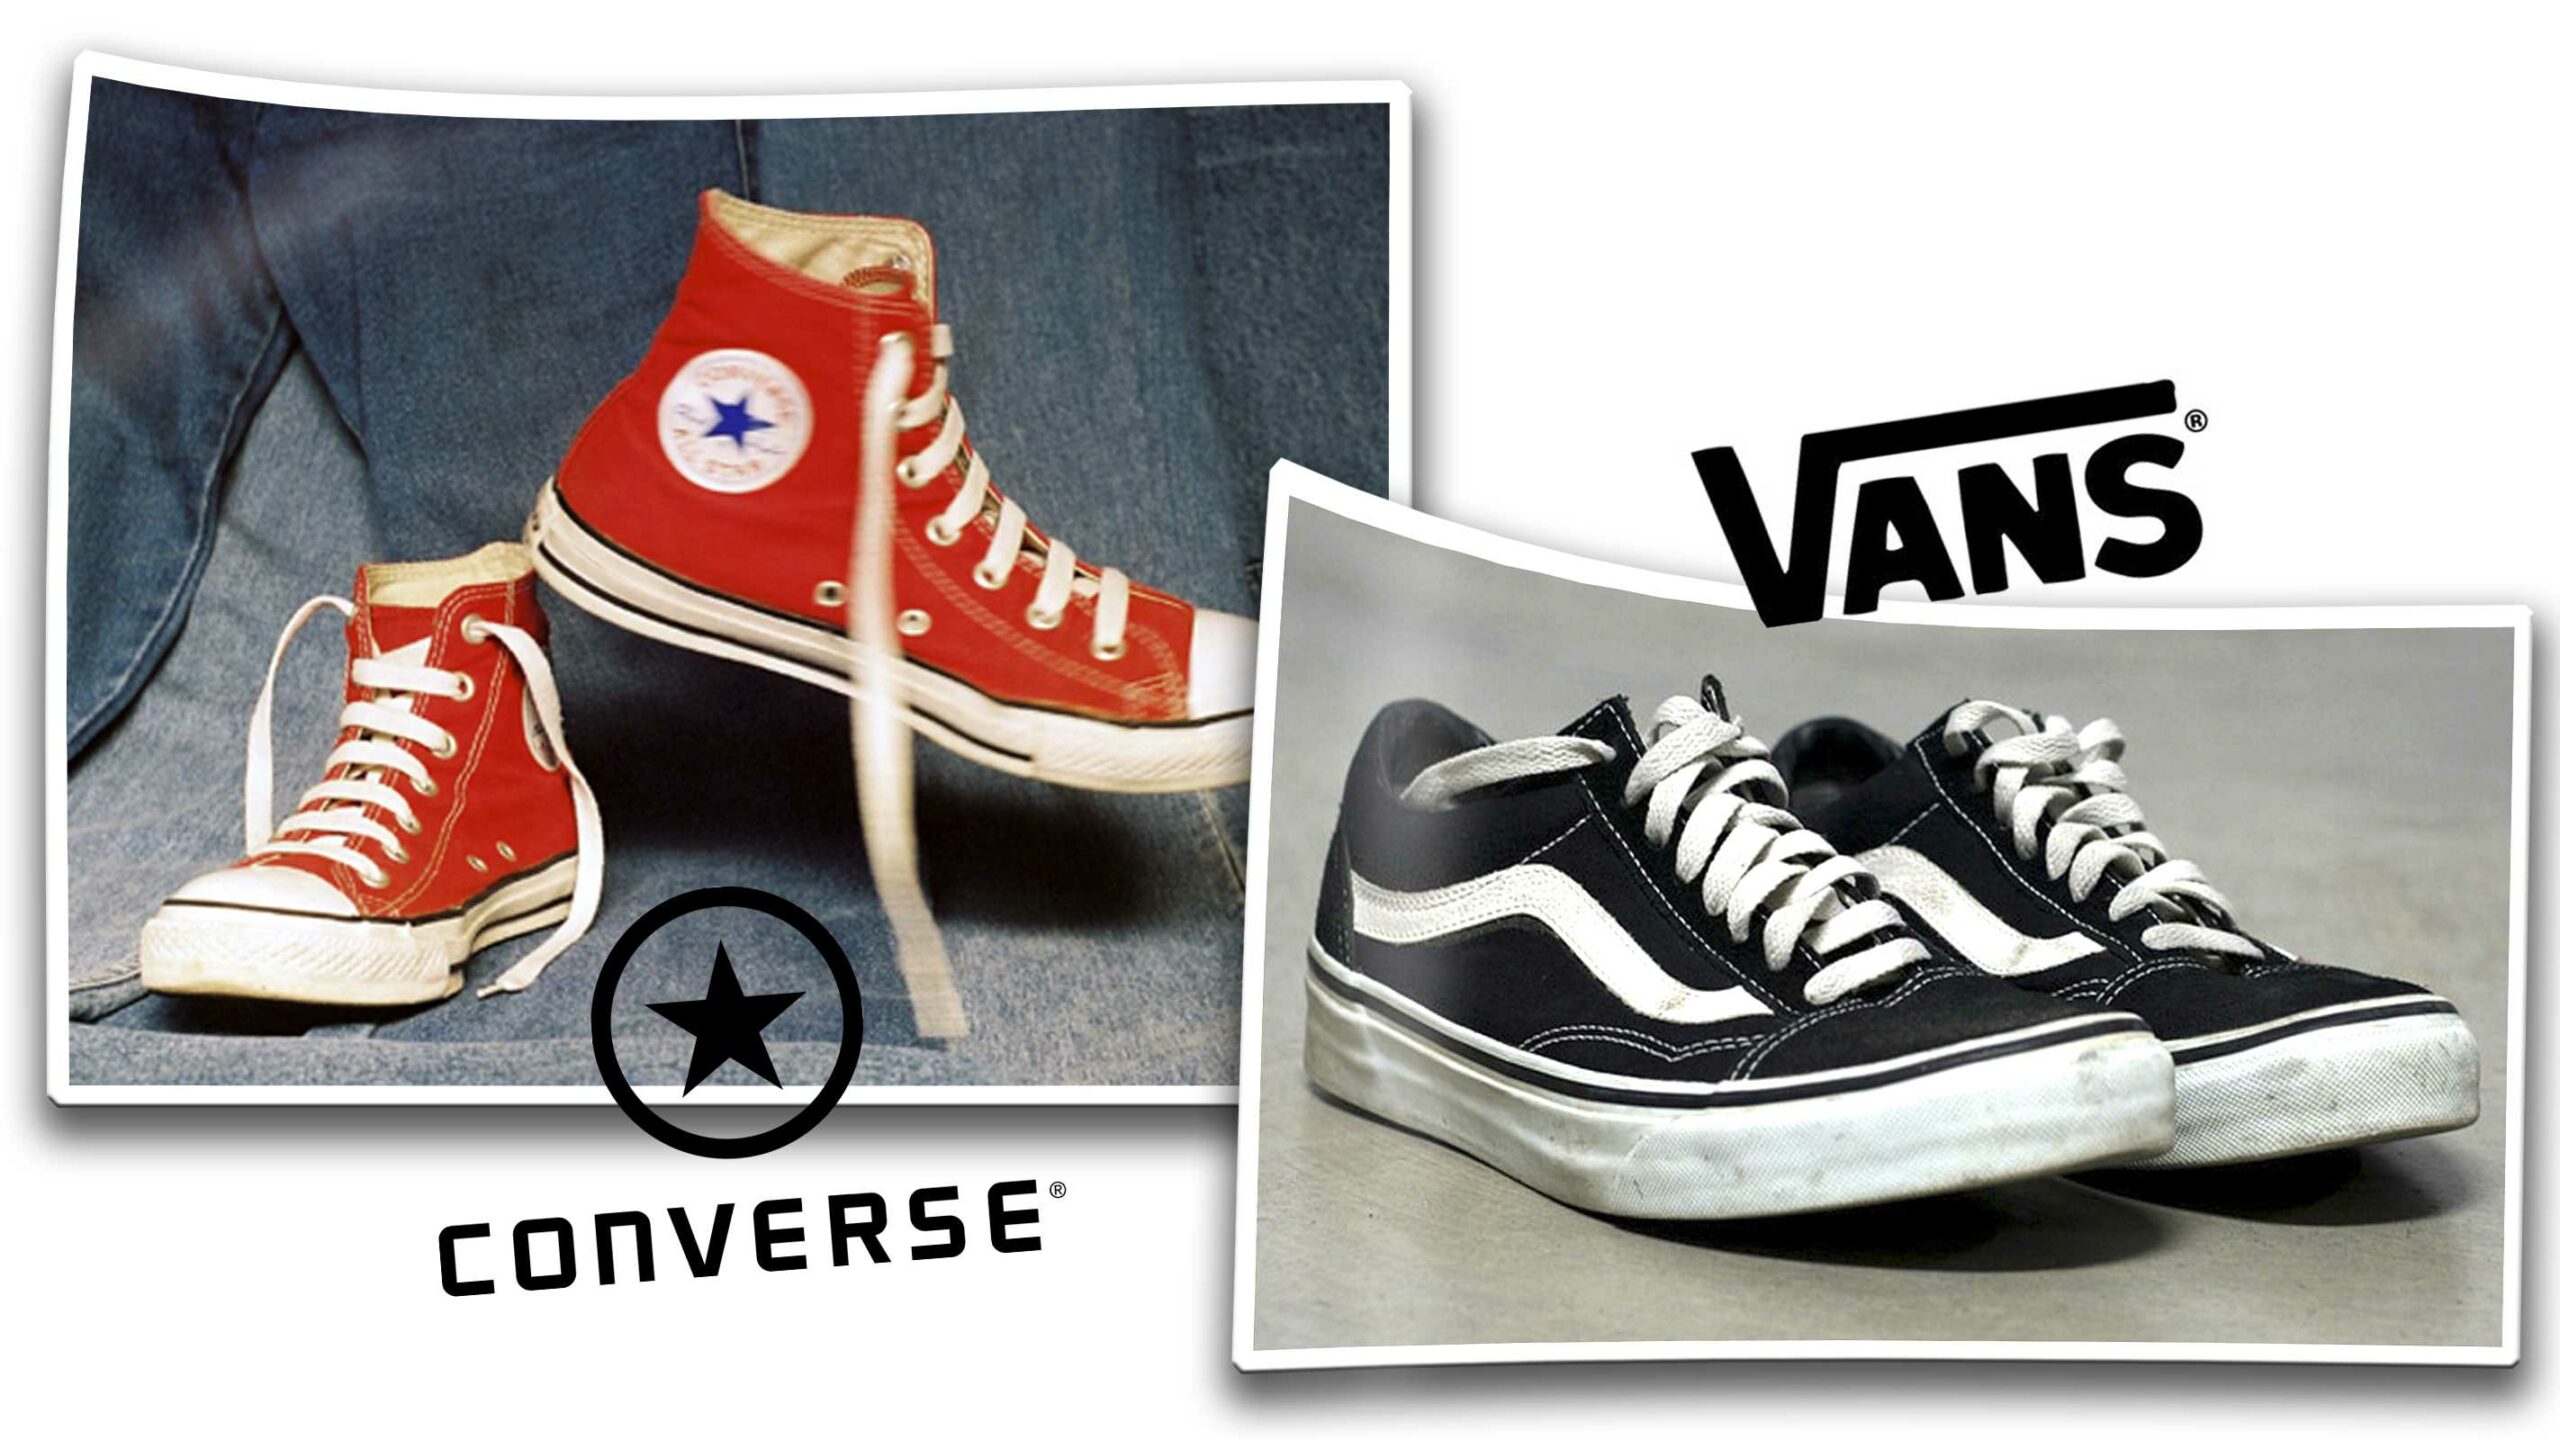 Which is older Vans or Converse?